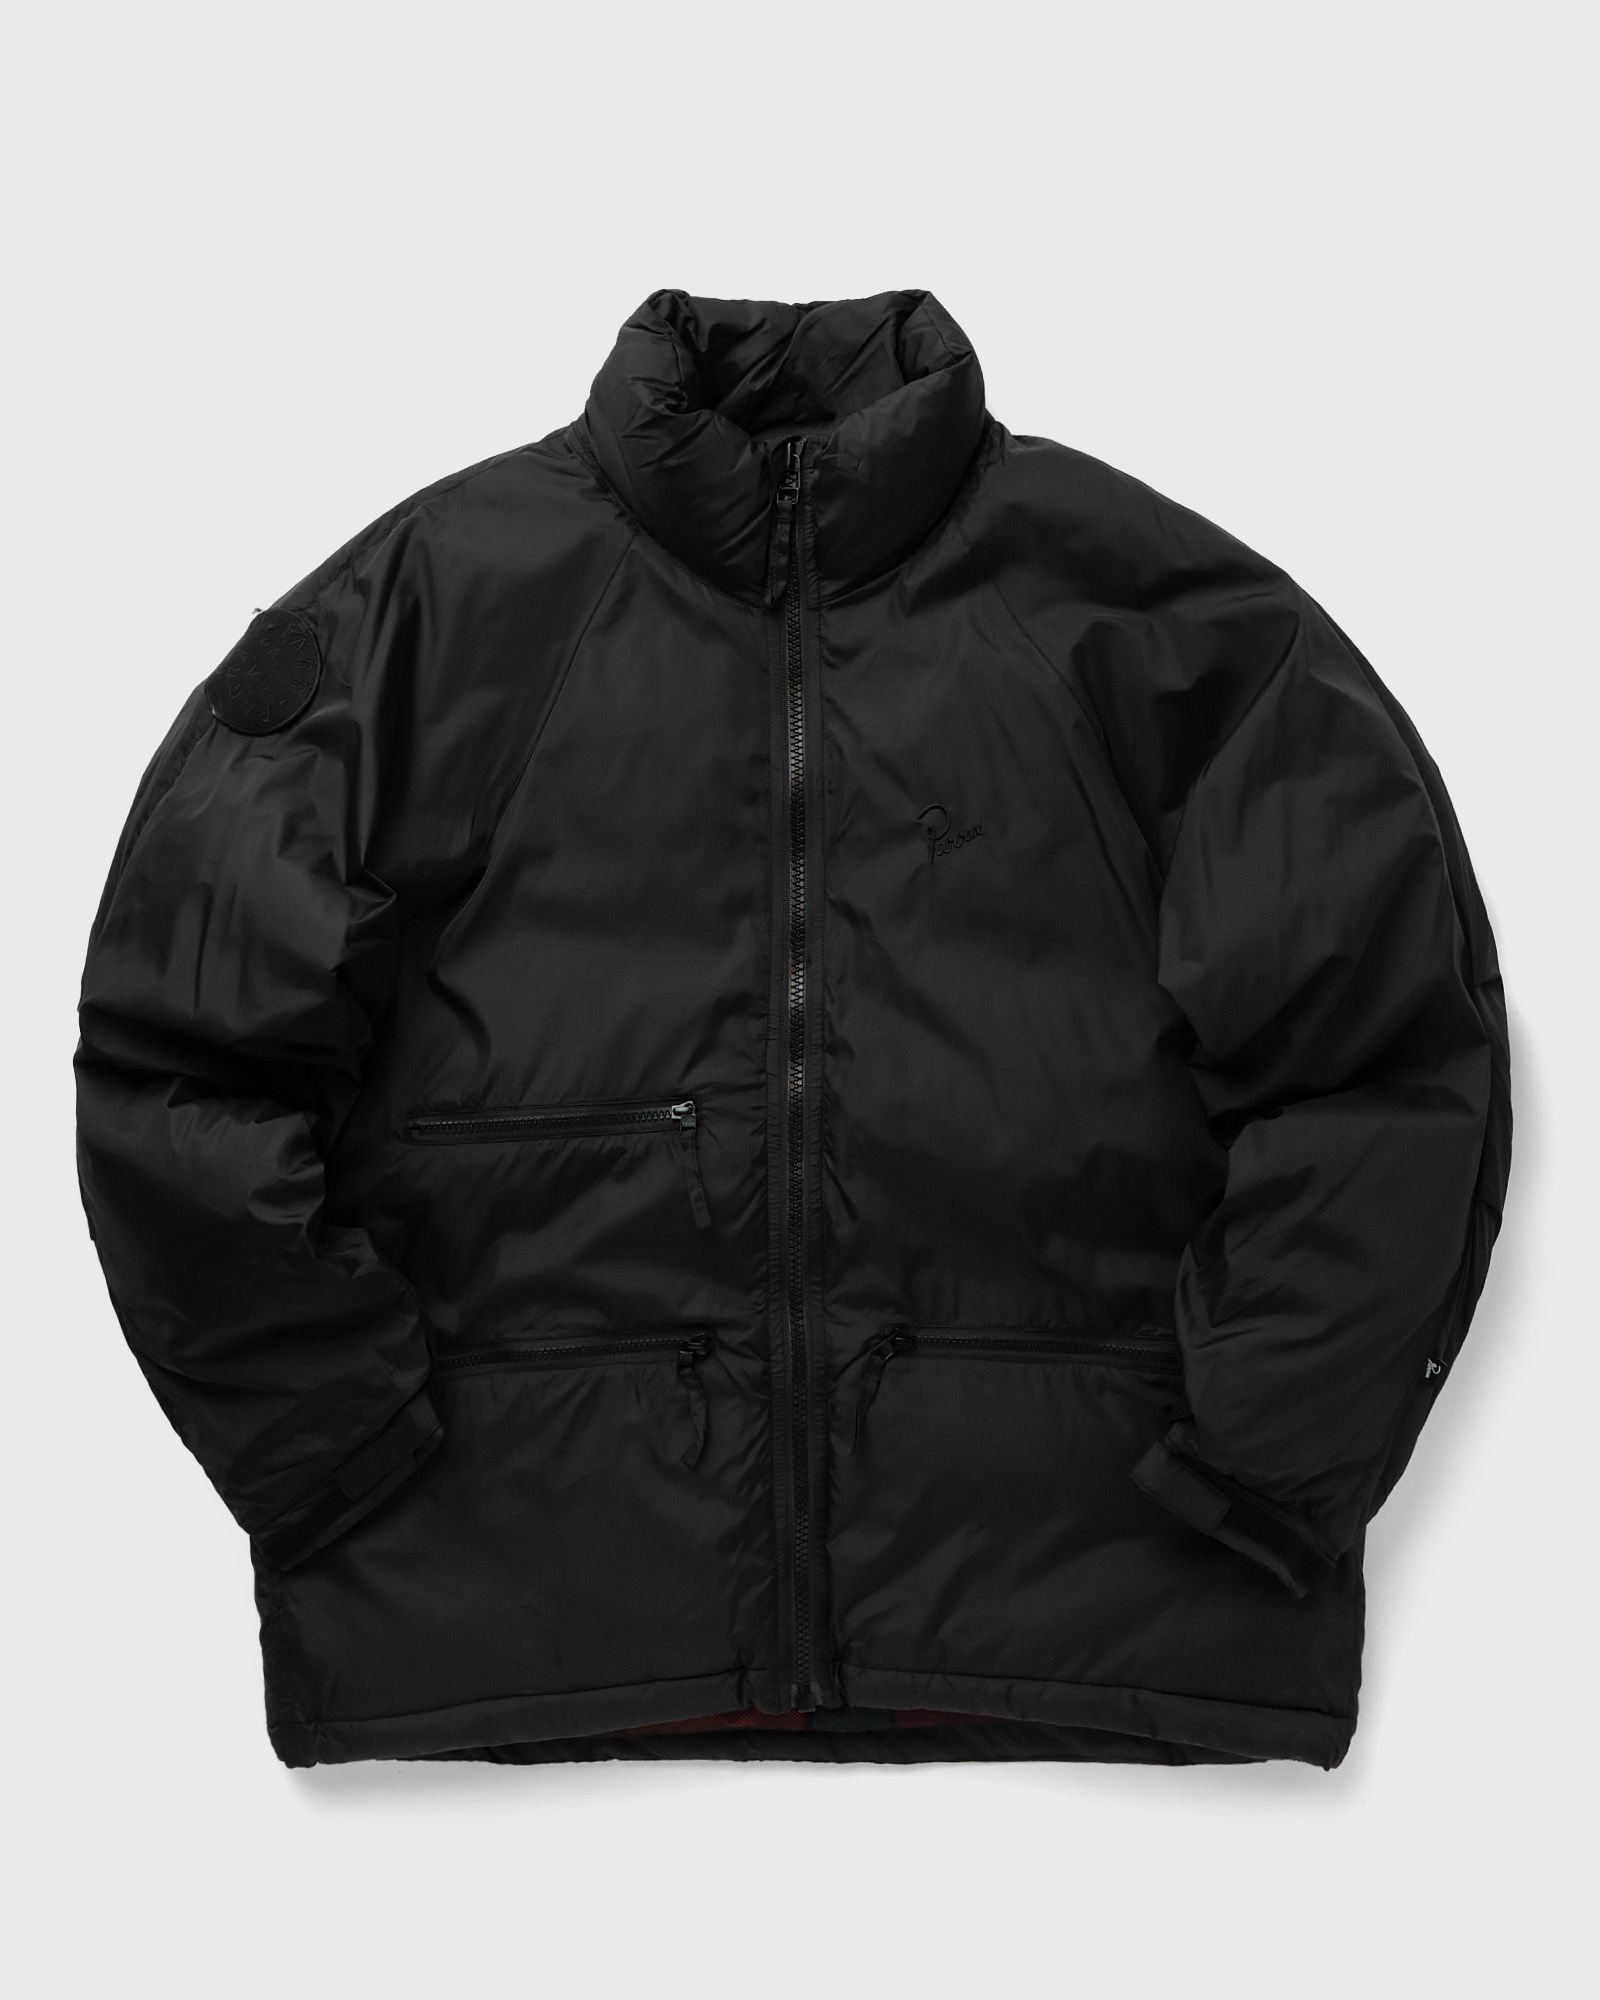 By Parra - canyons all over jacket men down & puffer jackets black in größe:xxl